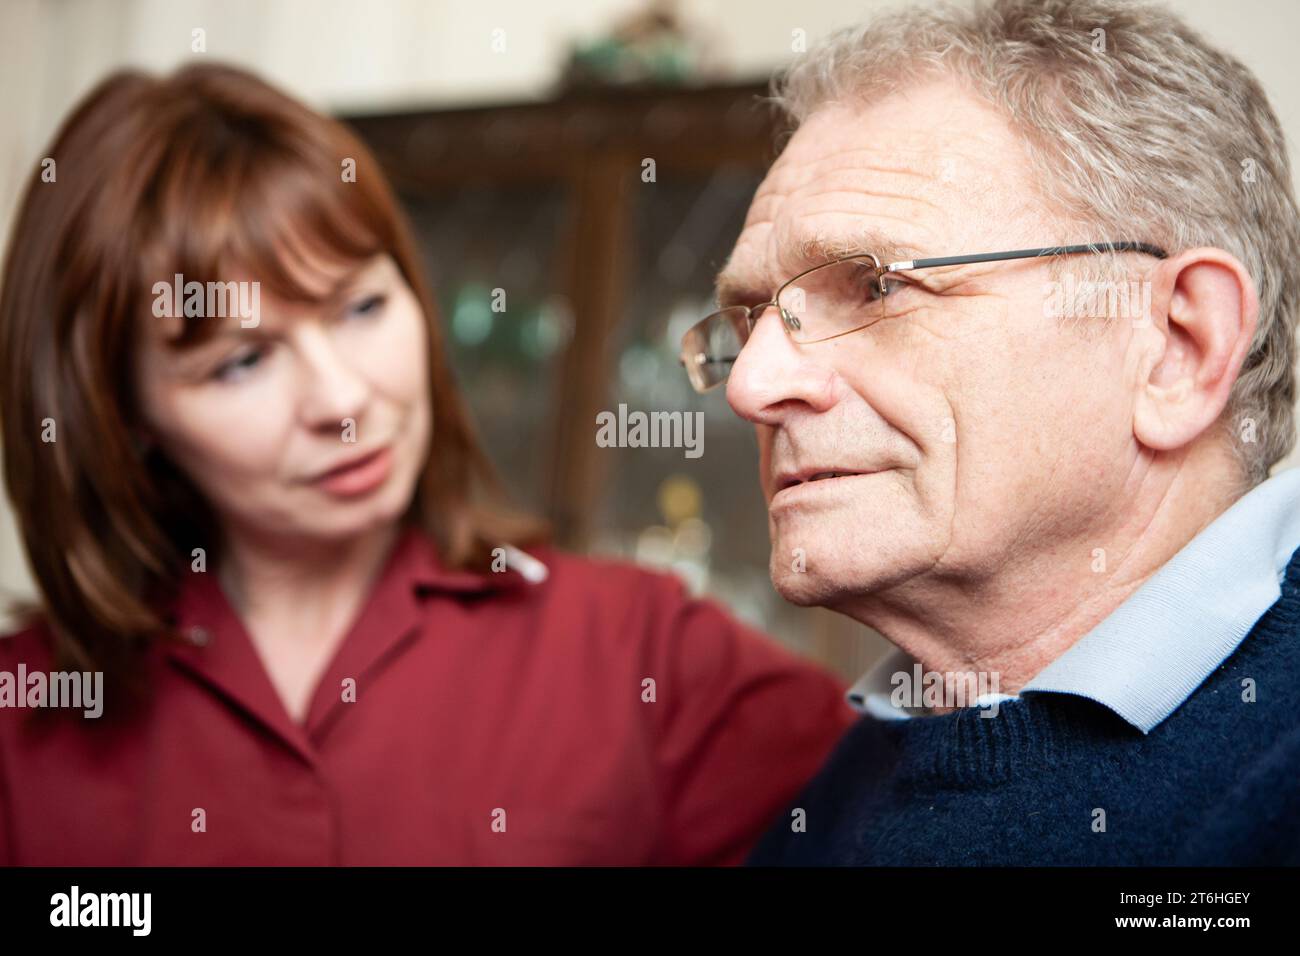 Help the Aged: Home Care. A concerned look on the face of a senior man under the supervision of a visiting care worker. From a series of related image Stock Photo